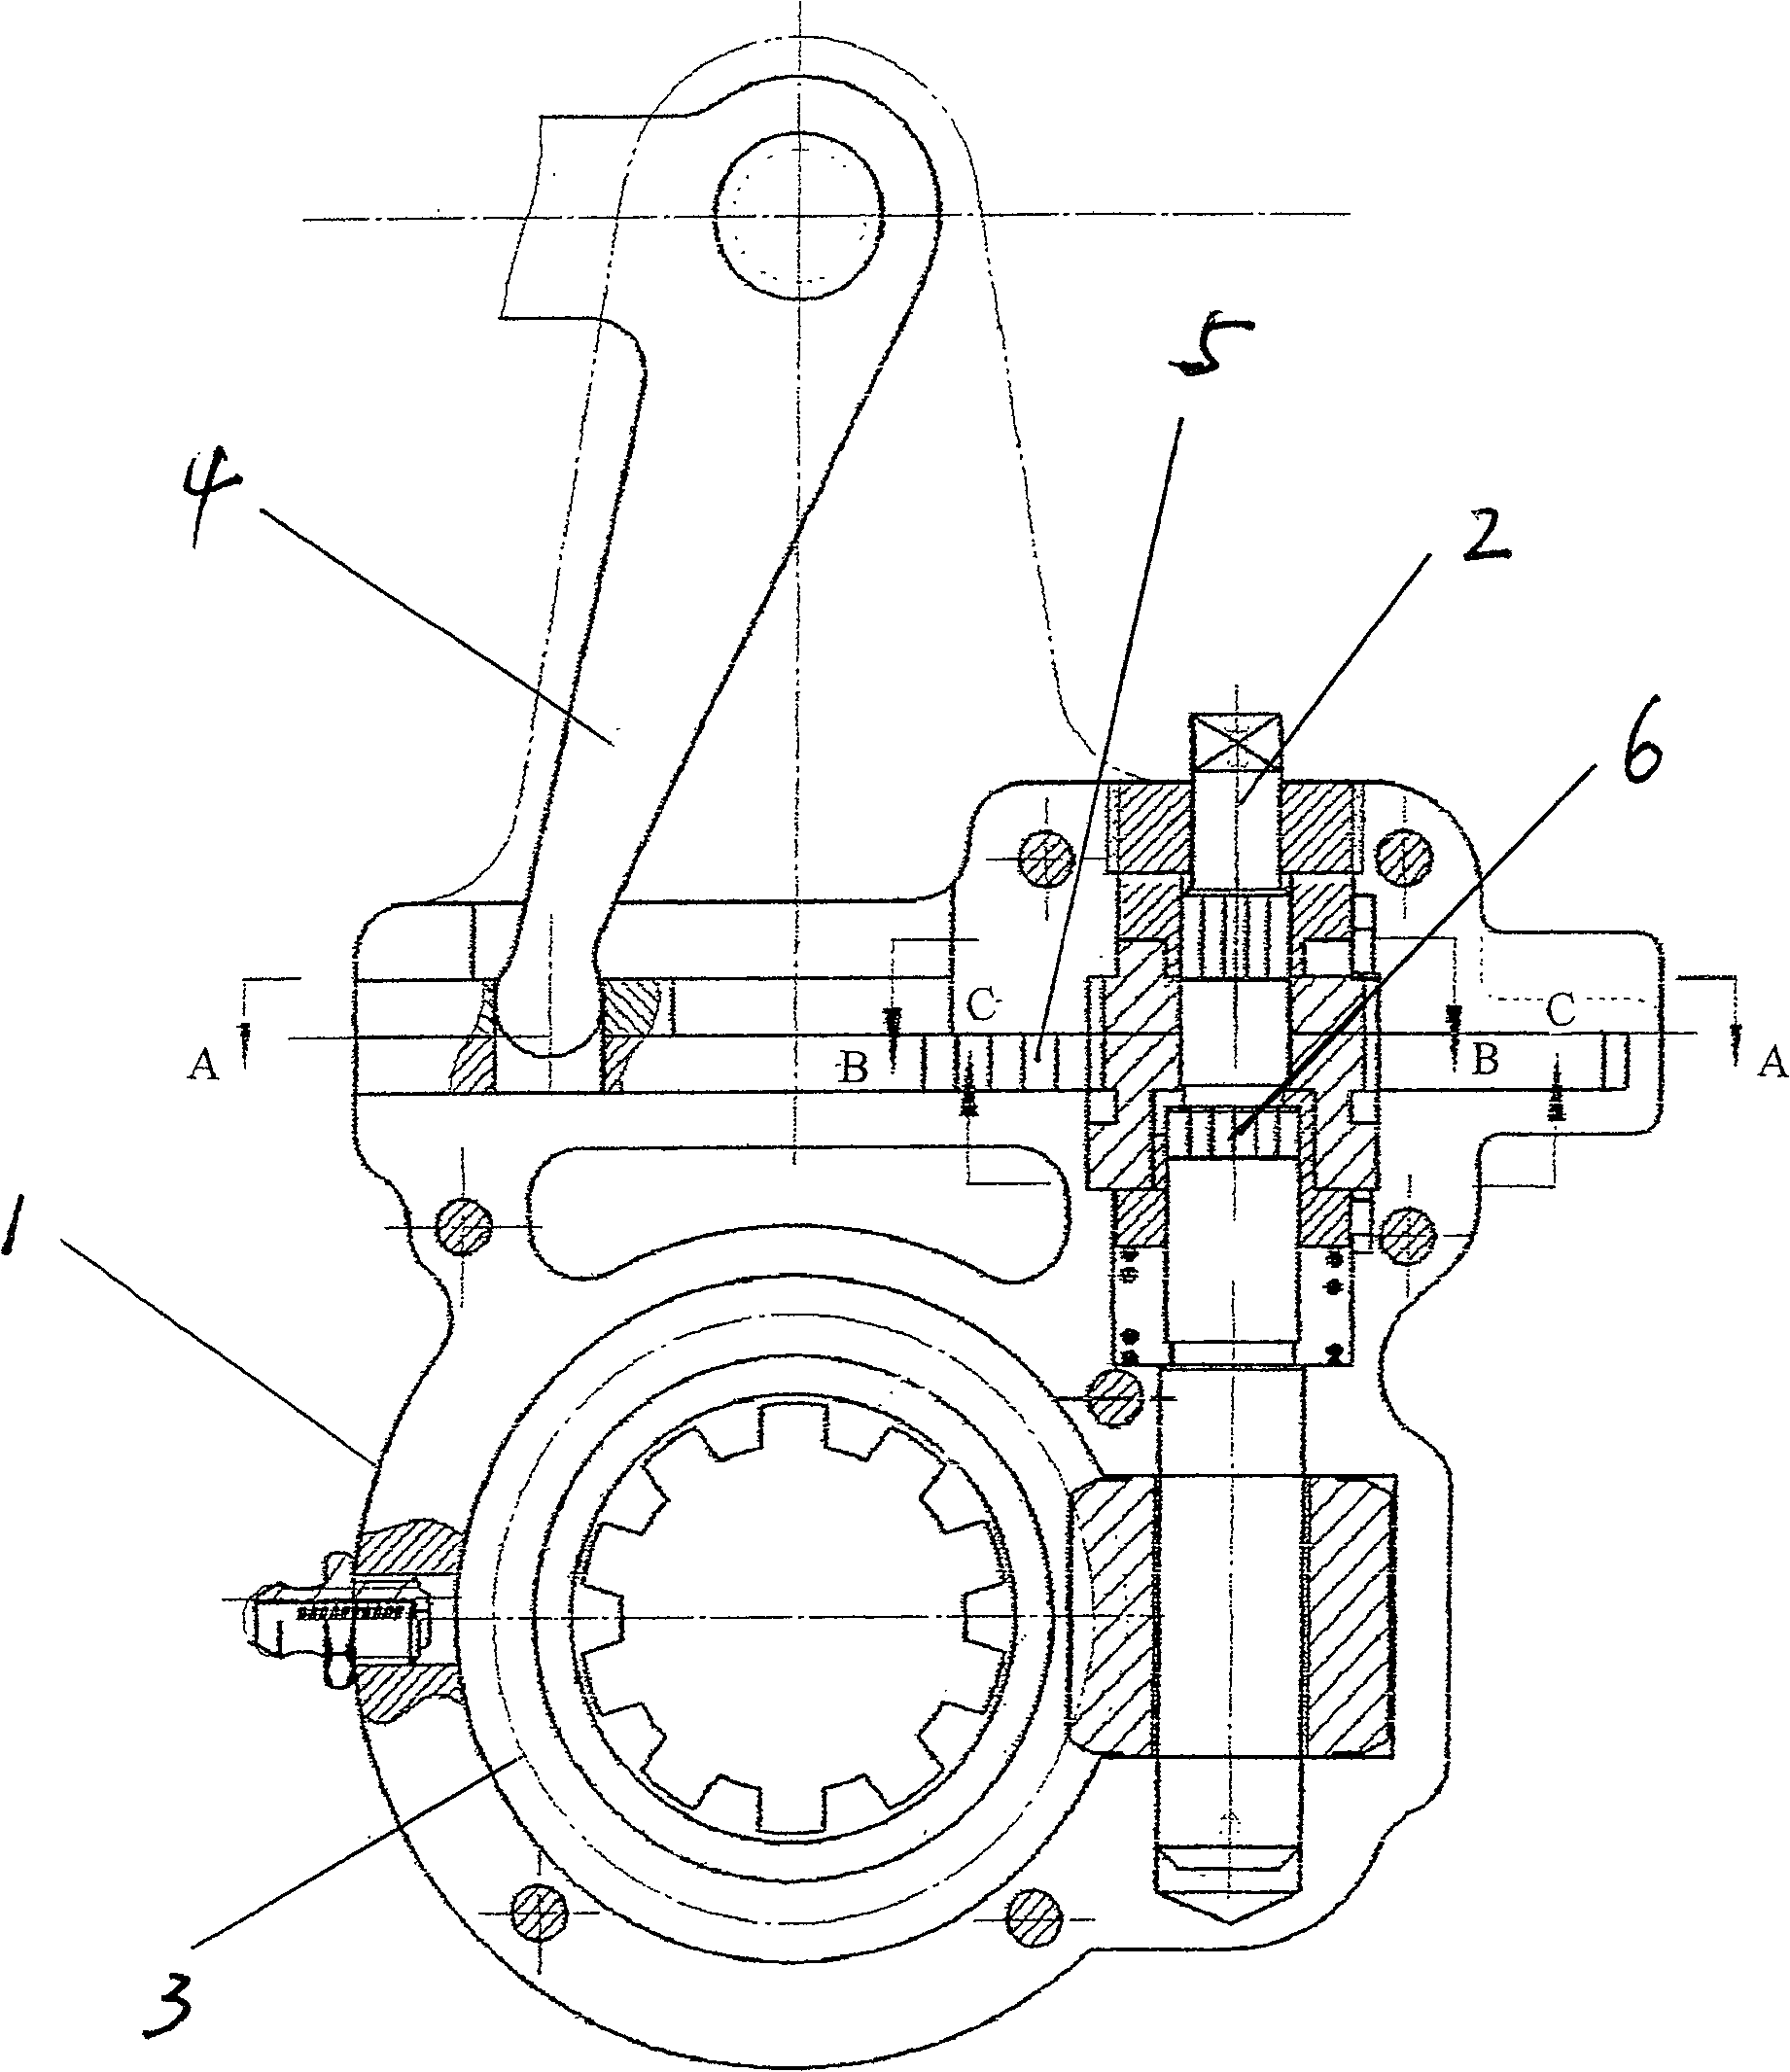 Automatic regulating arm for automobile braking